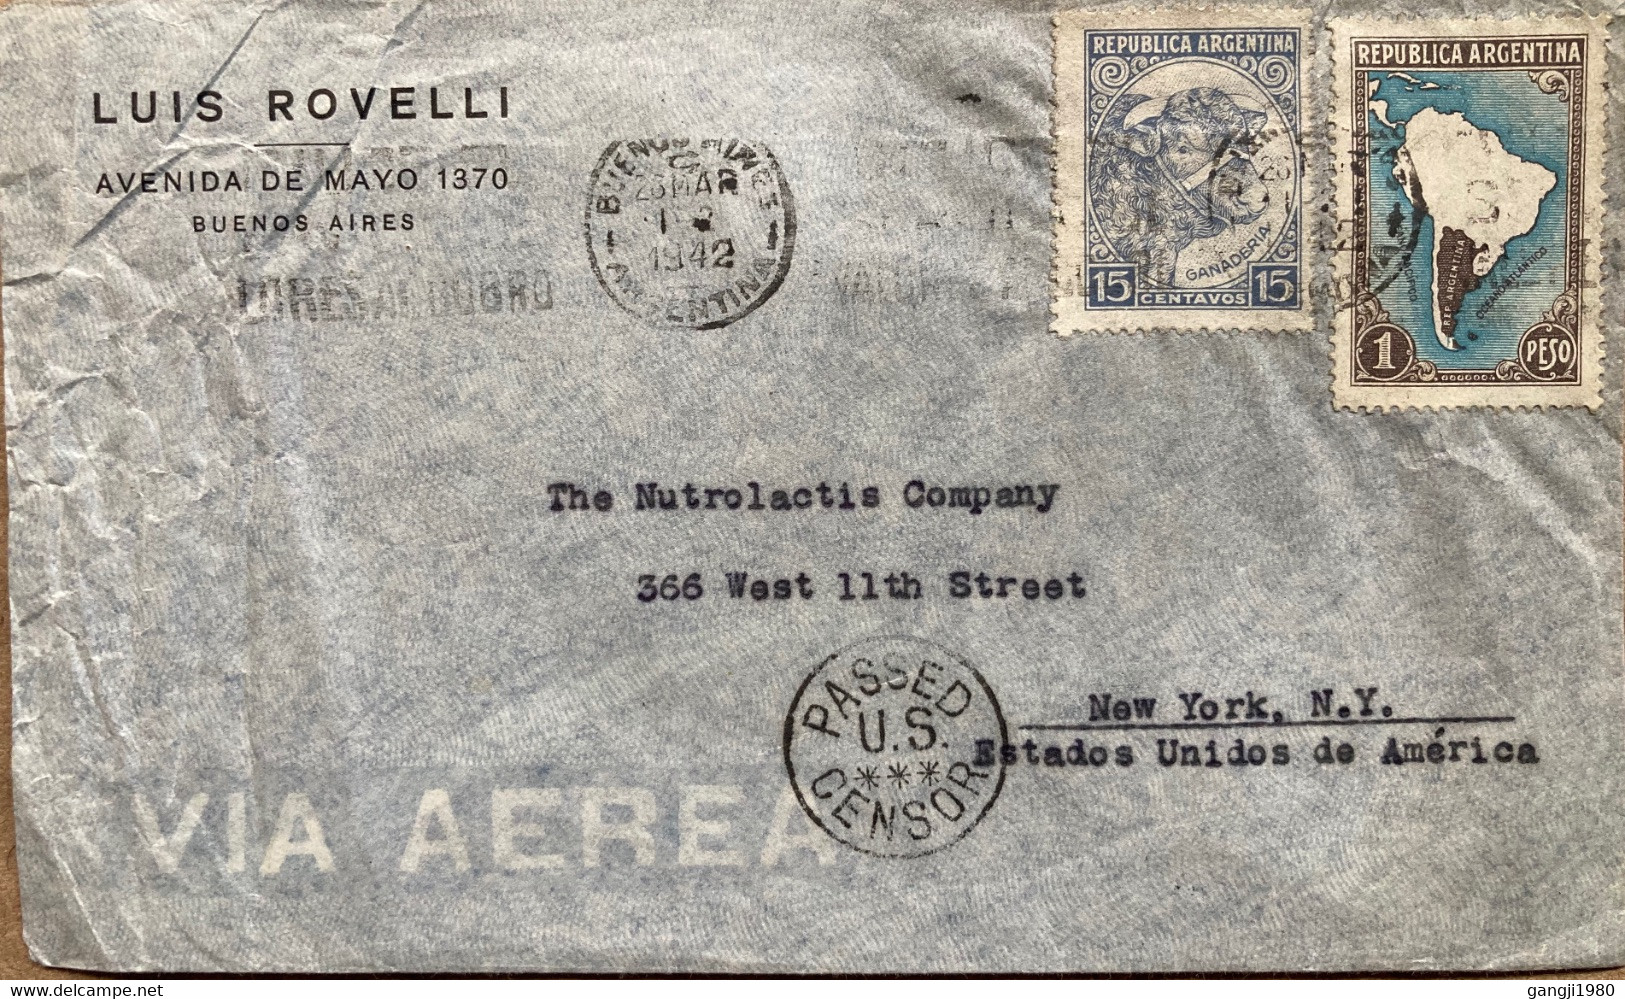 ARGENTINA-1942, WORLD WAR-2, COVER USED TO USA,PASSED US CENSOR CANCEL, PRIVATE COVER, LUIS ROVELLI, MAP, BUFFALO STAMP. - Lettres & Documents